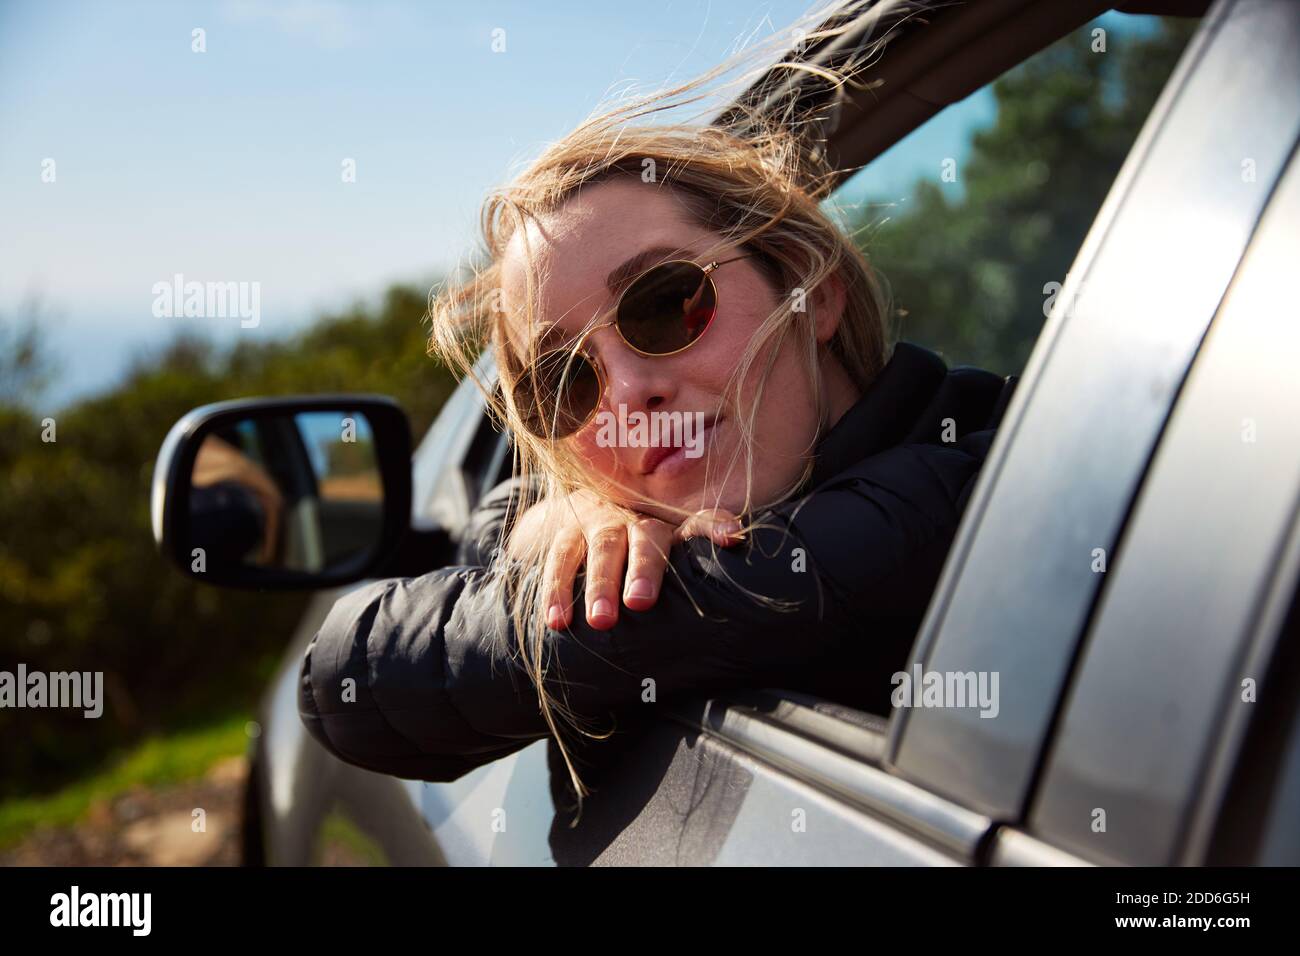 Young woman wearing sunglasses with eyes closed on road trip vacation leaning out of rental car window with beautiful mountain landscape behind Stock Photo